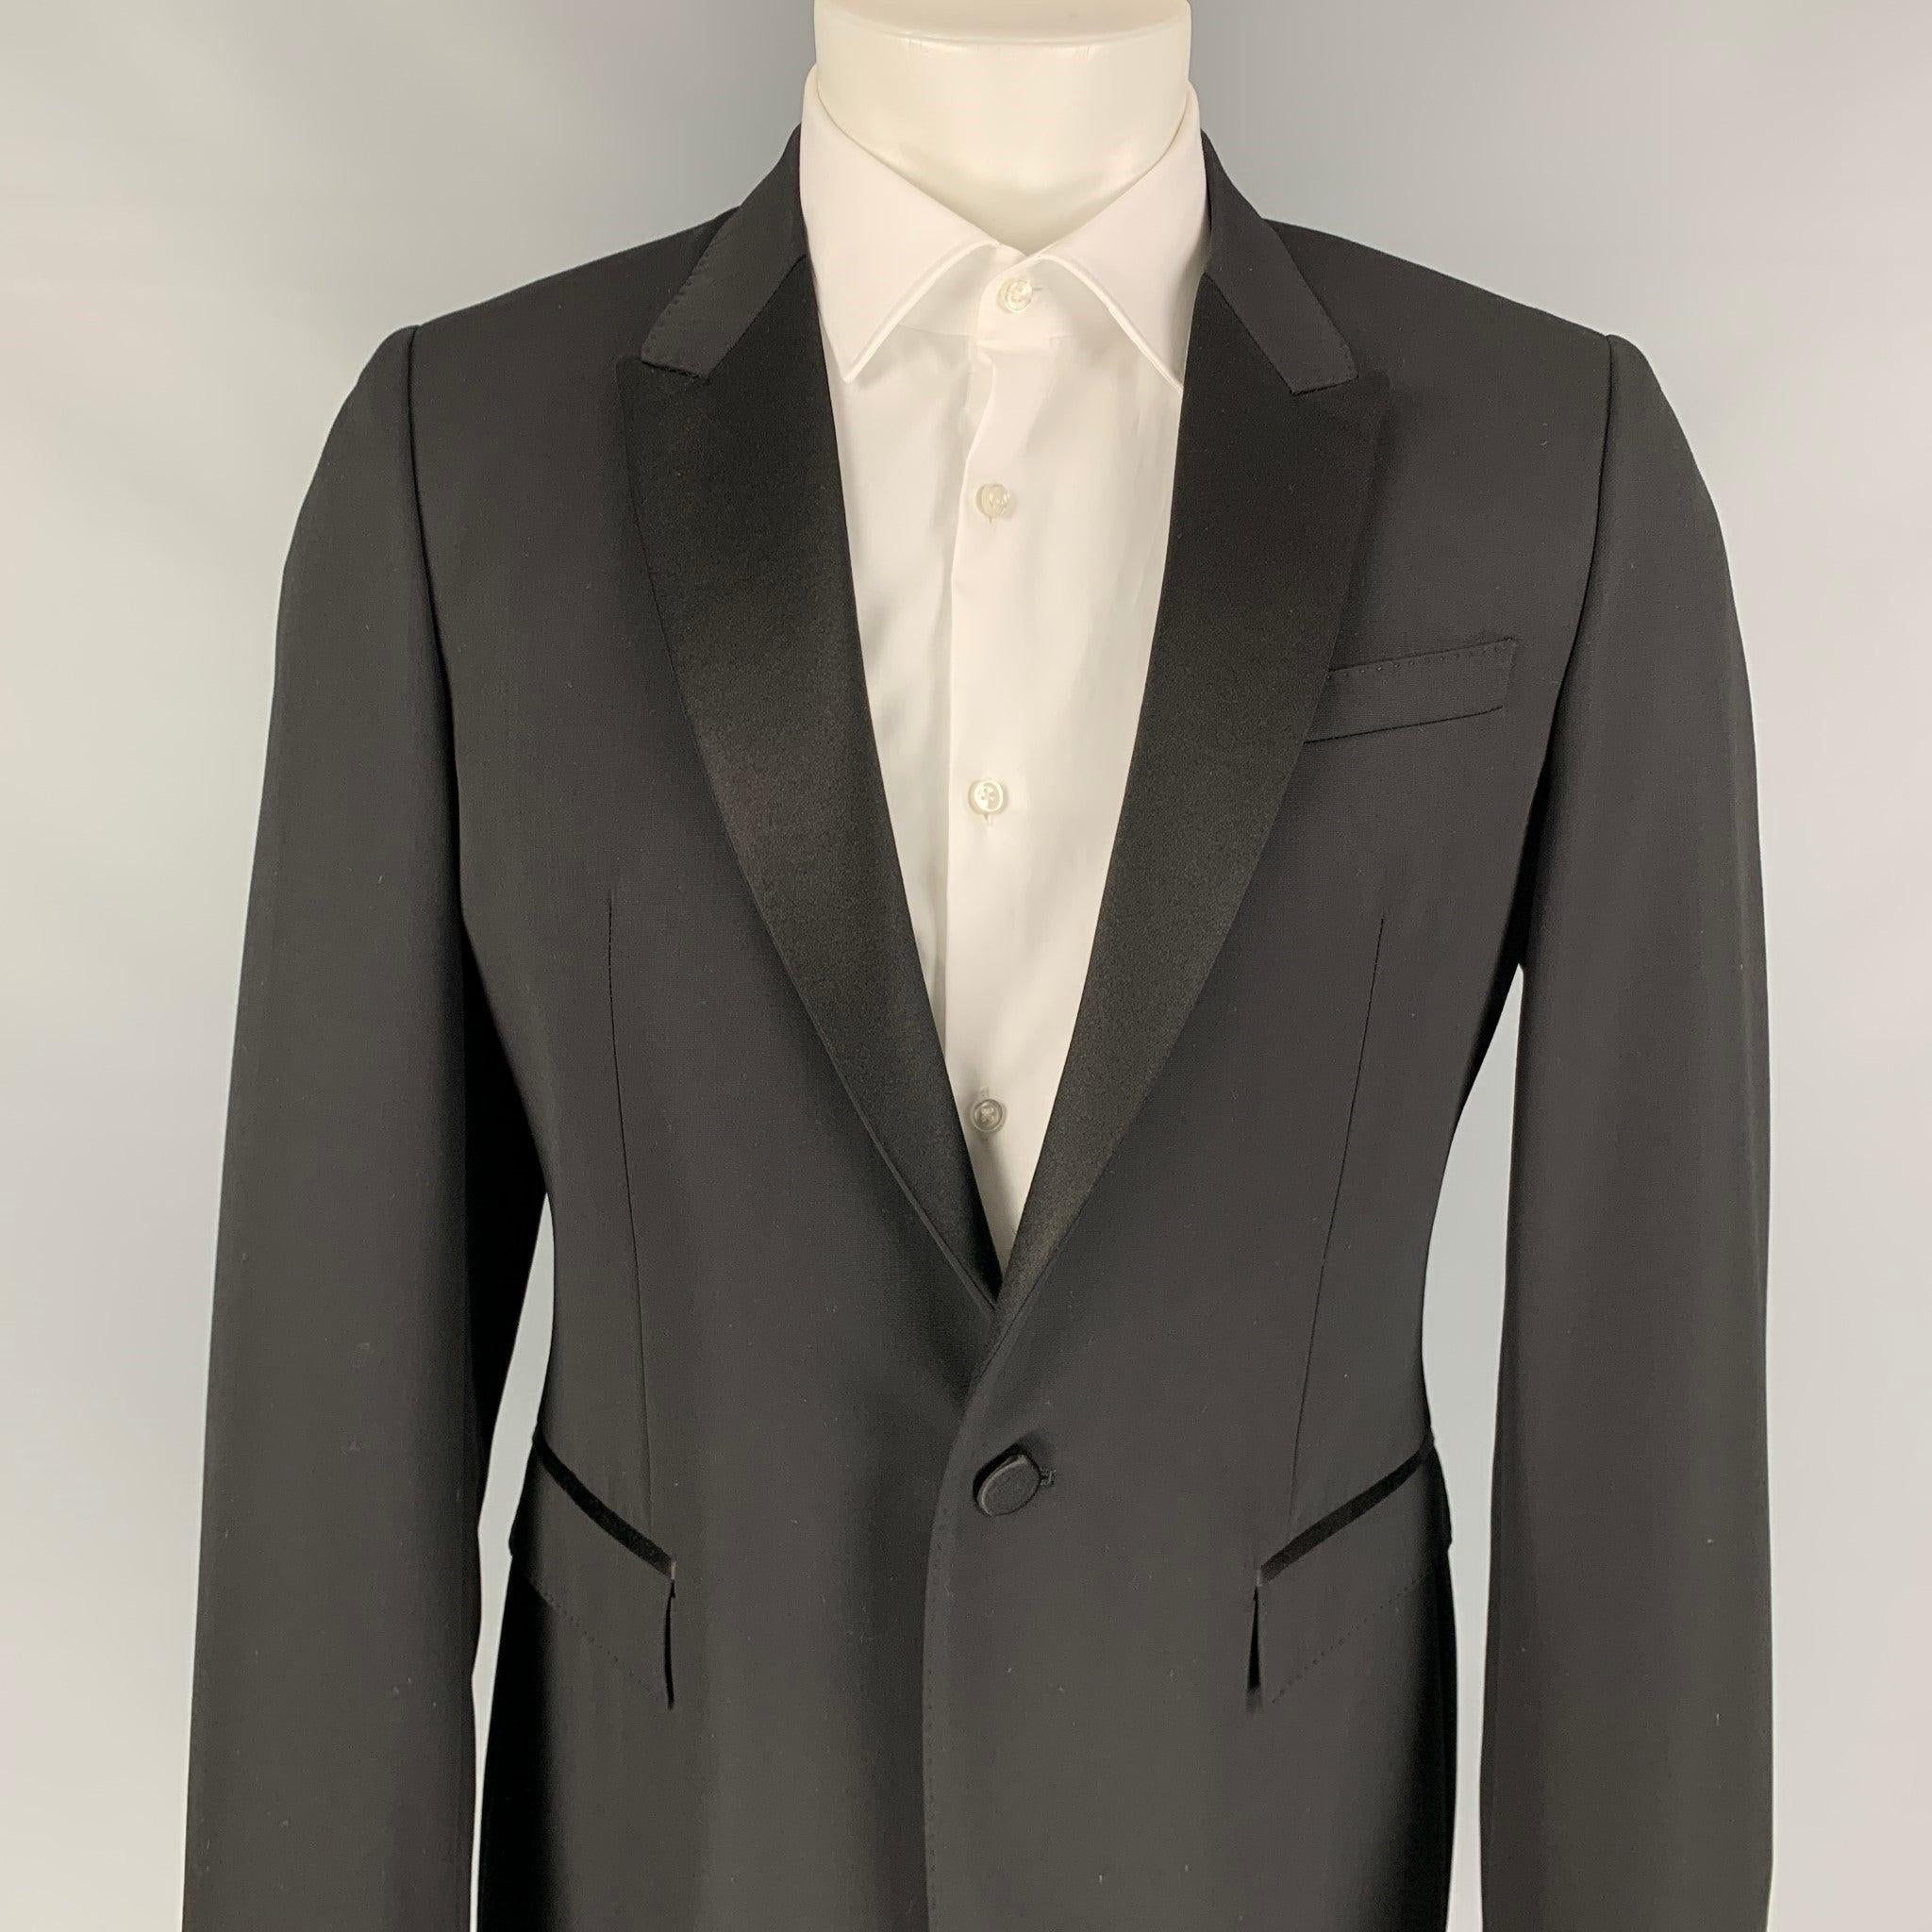 BURBERRY PRORSUM sport coat comes in a black wool with a full liner featuring a peak lapel, flap pockets, double back vent, and a single button closure. Made in Italy.New With Tags.
 

Marked:   40 

Measurements: 
 
Shoulder: 17 inches  Chest: 40